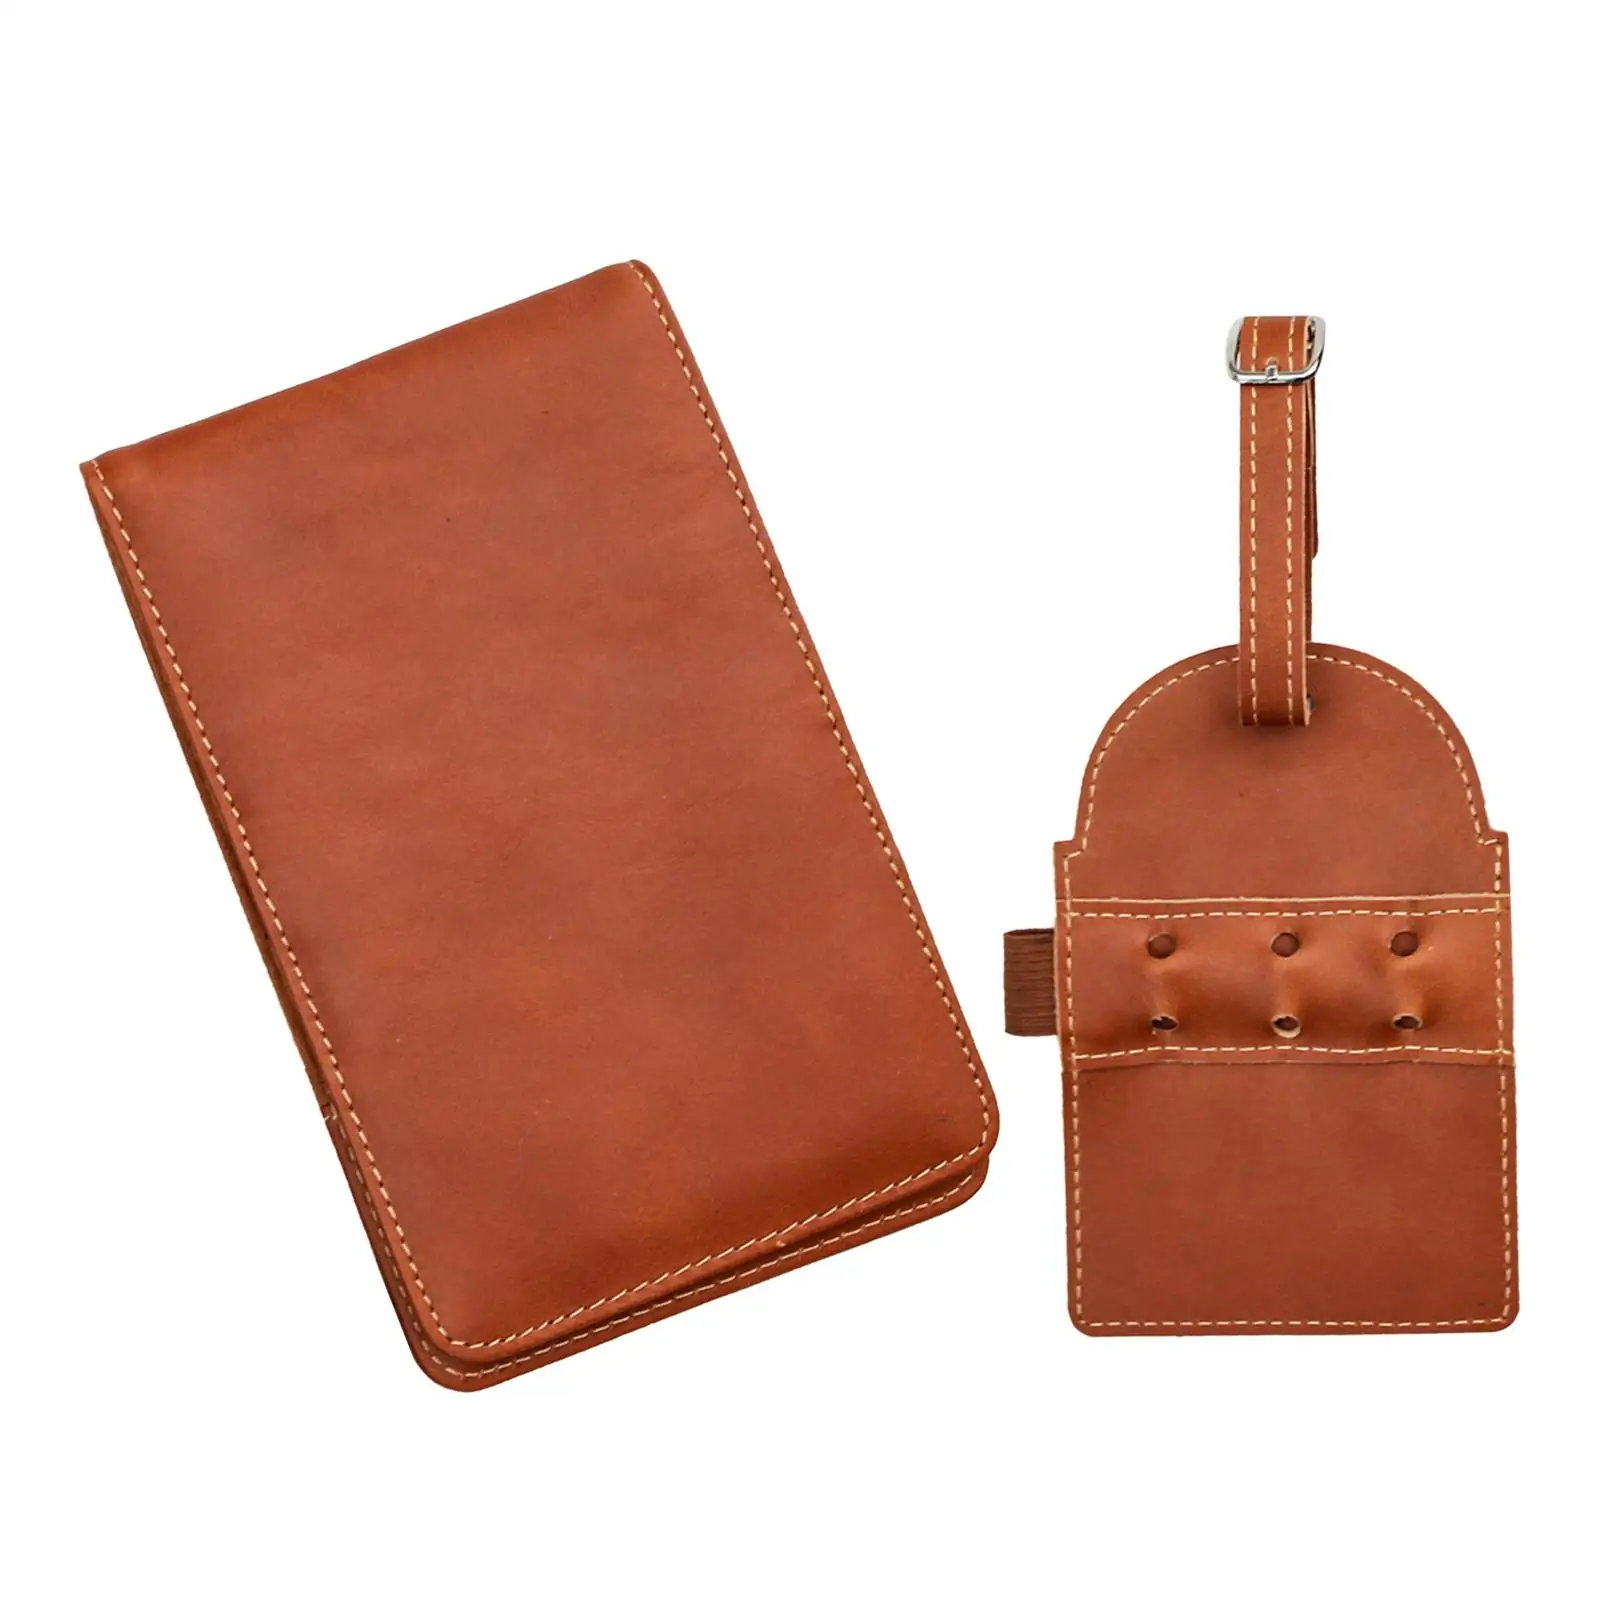 PU Golf Scorecard Holder W/ Tees Holder PU Leather Easy to Use Journal for Golf Golfer Practicing Golfing Recording Training